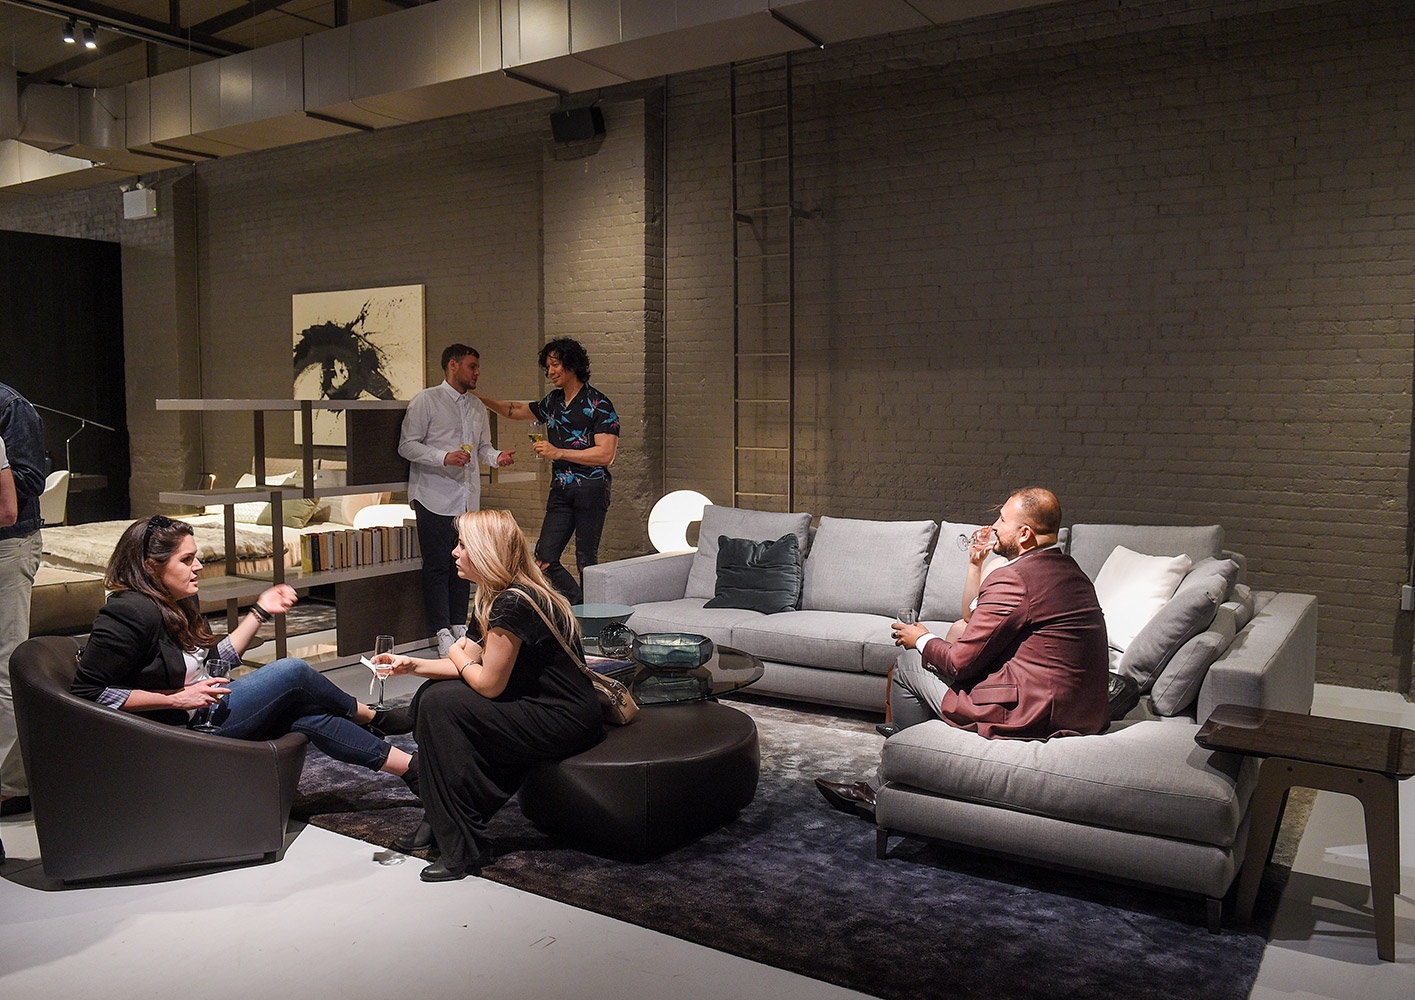 Toronto Inauguration Of The First Minotti Flagship Store In Canada